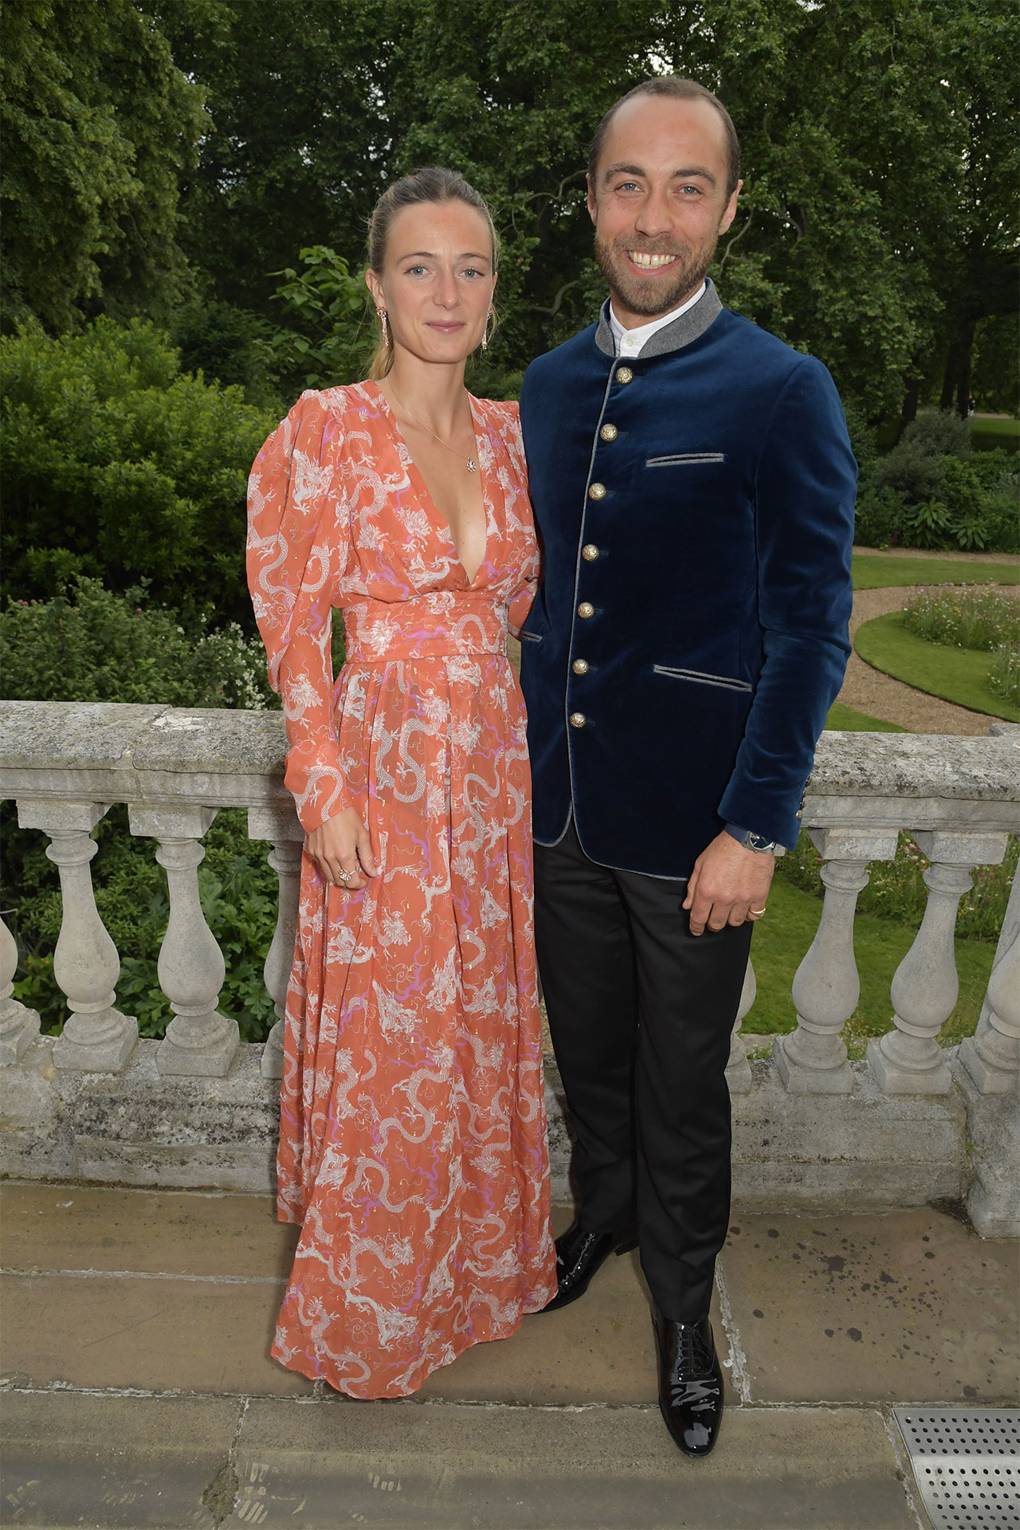 Third time lucky: James Middleton finally marries Alizee Thevenet after